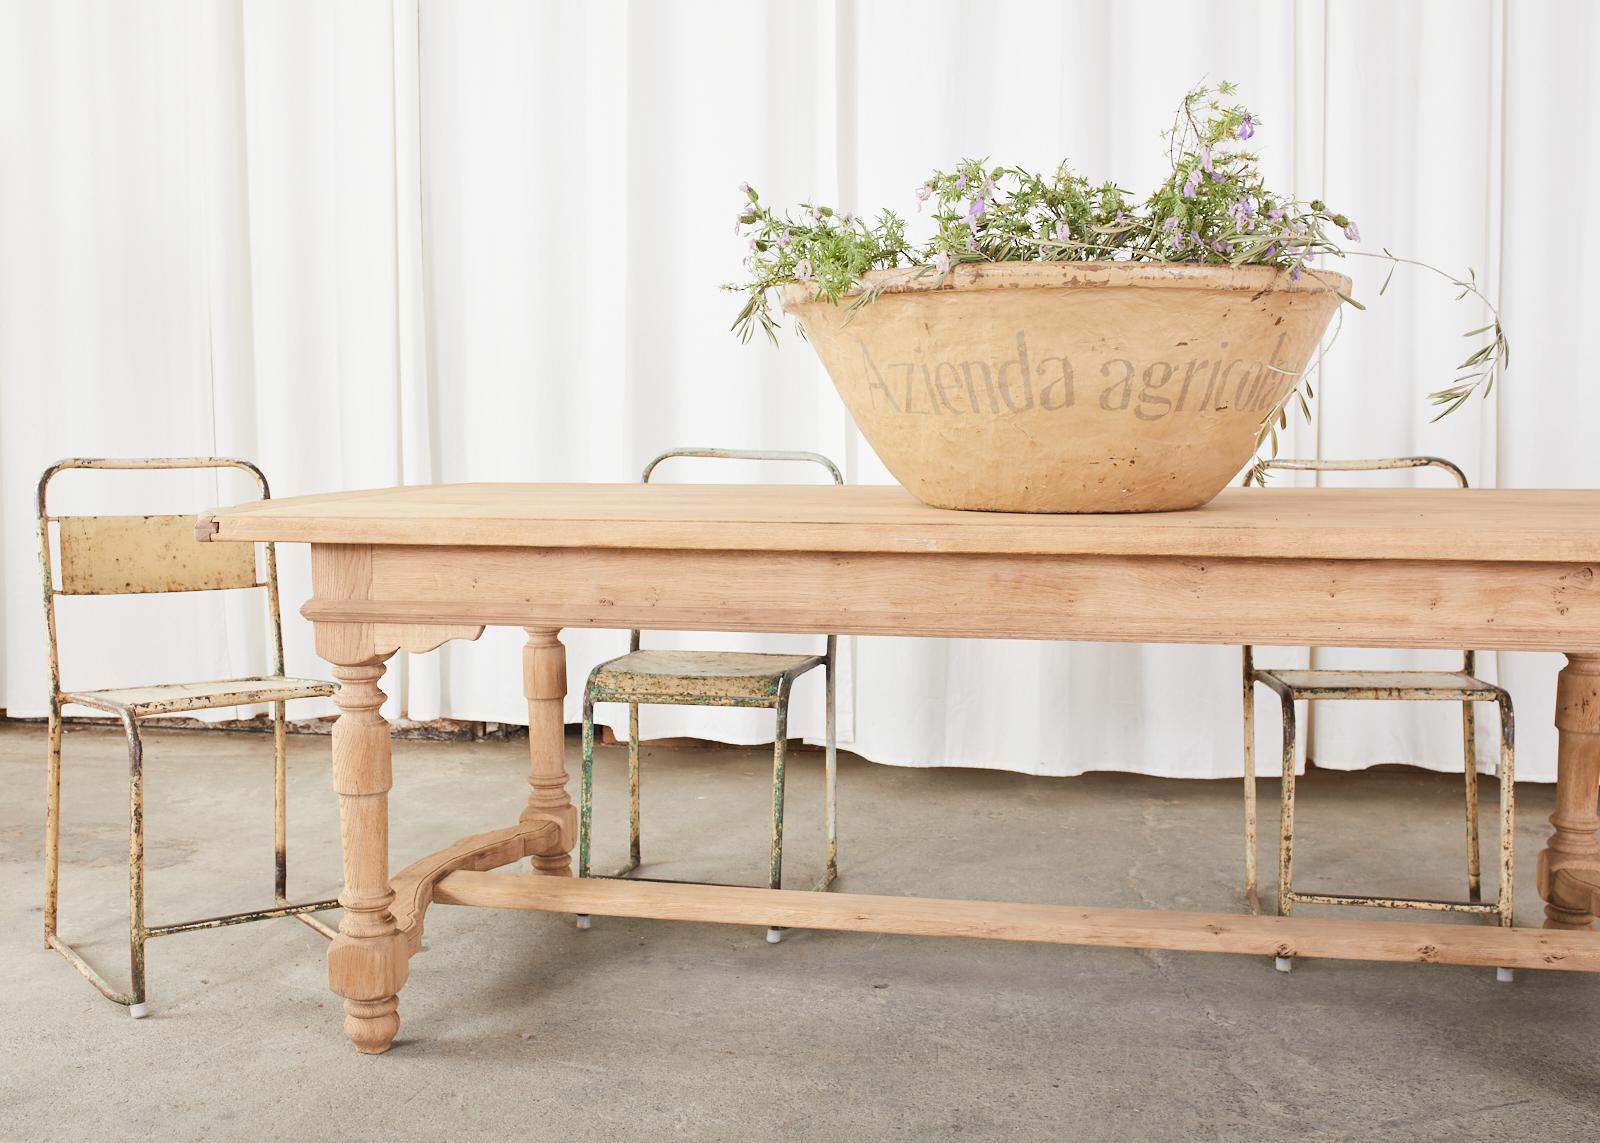 Rustic bleached oak farmhouse trestle dining table or harvest table made in the country French provincial style. The table features an intentionally stripped, bleached oak finish that gives the table character and charm. The top is crafted from 1.5